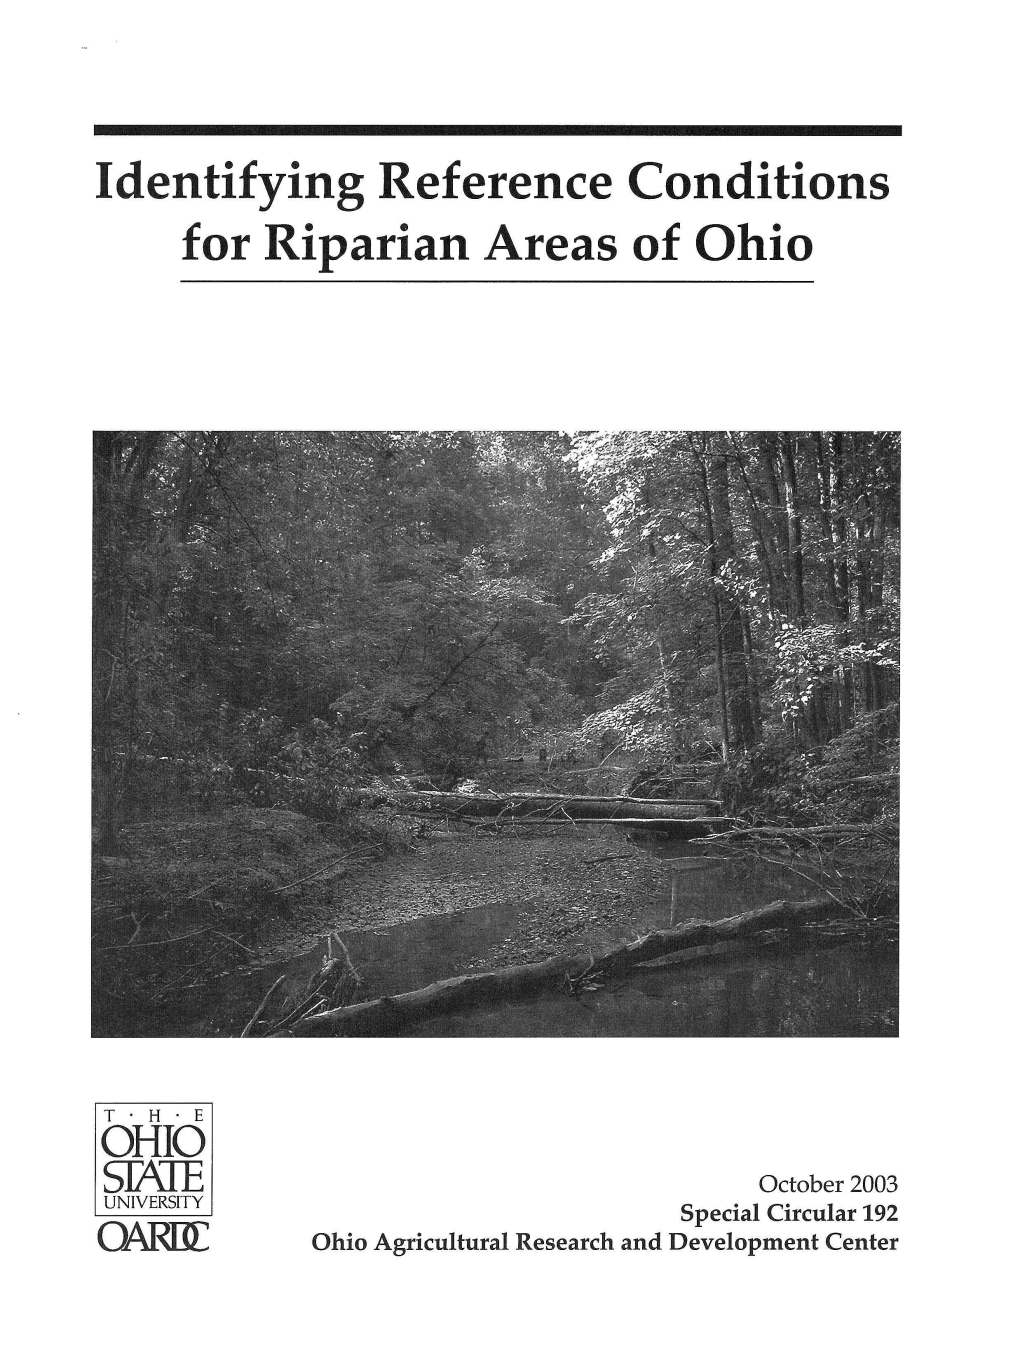 Identifying Reference Conditions for Riparian Areas of Ohio